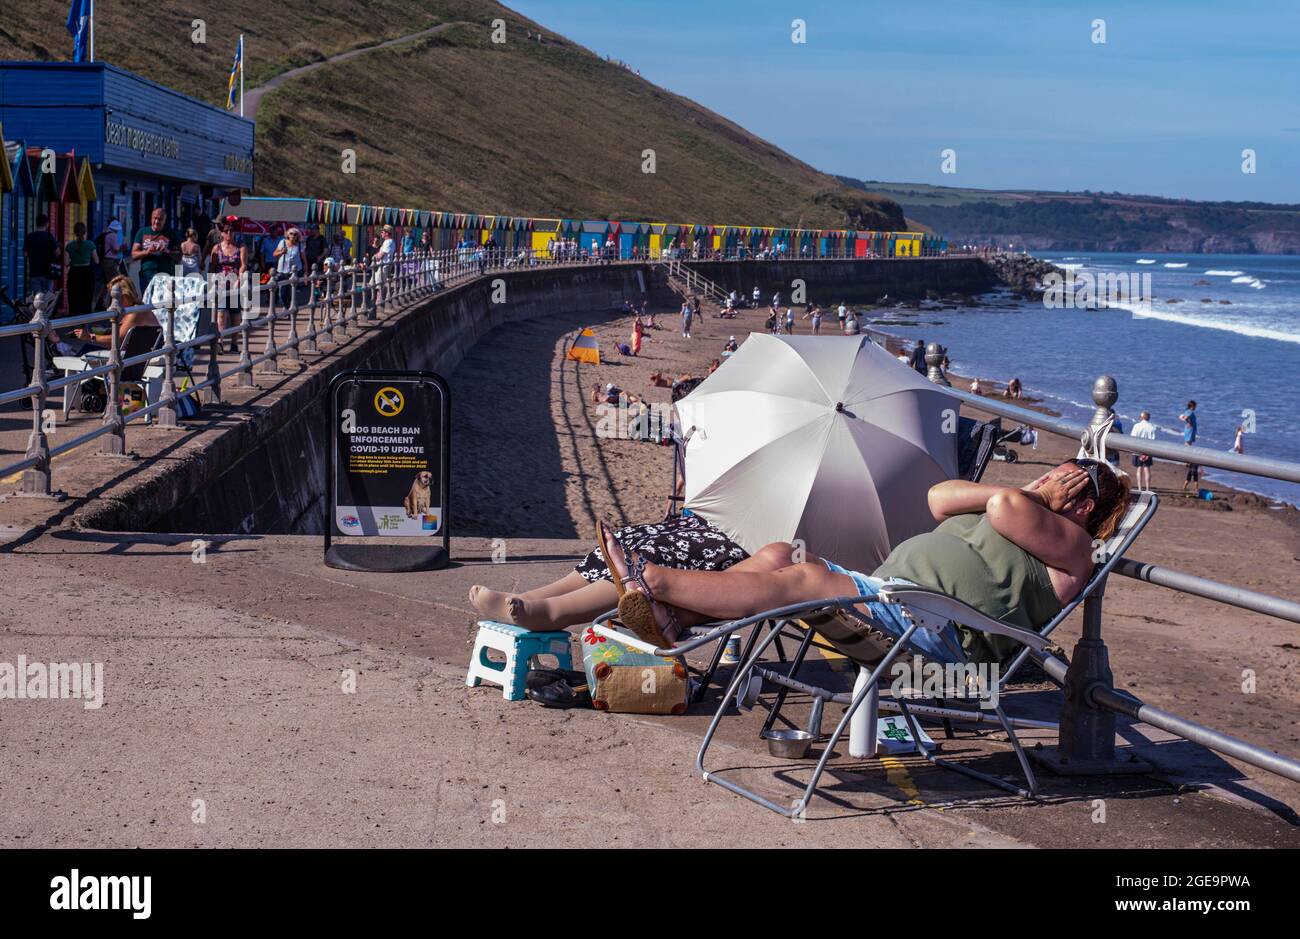 Woman relaxing on sun lounger by beach in Whitby in England. Stock Photo